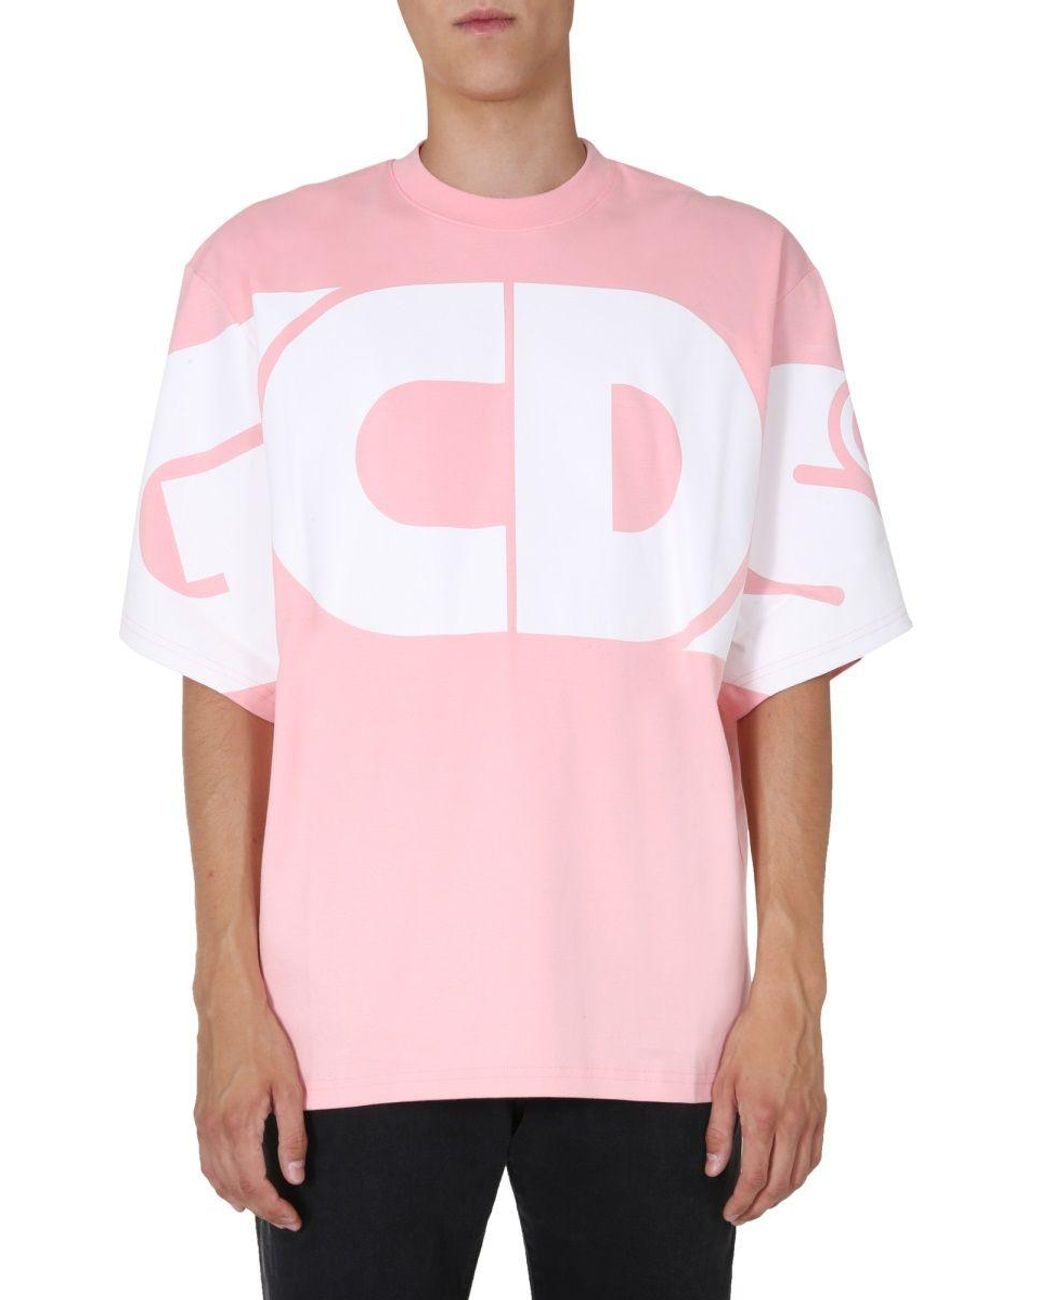 Gcds Cotton T-shirt in Pink for Men - Lyst